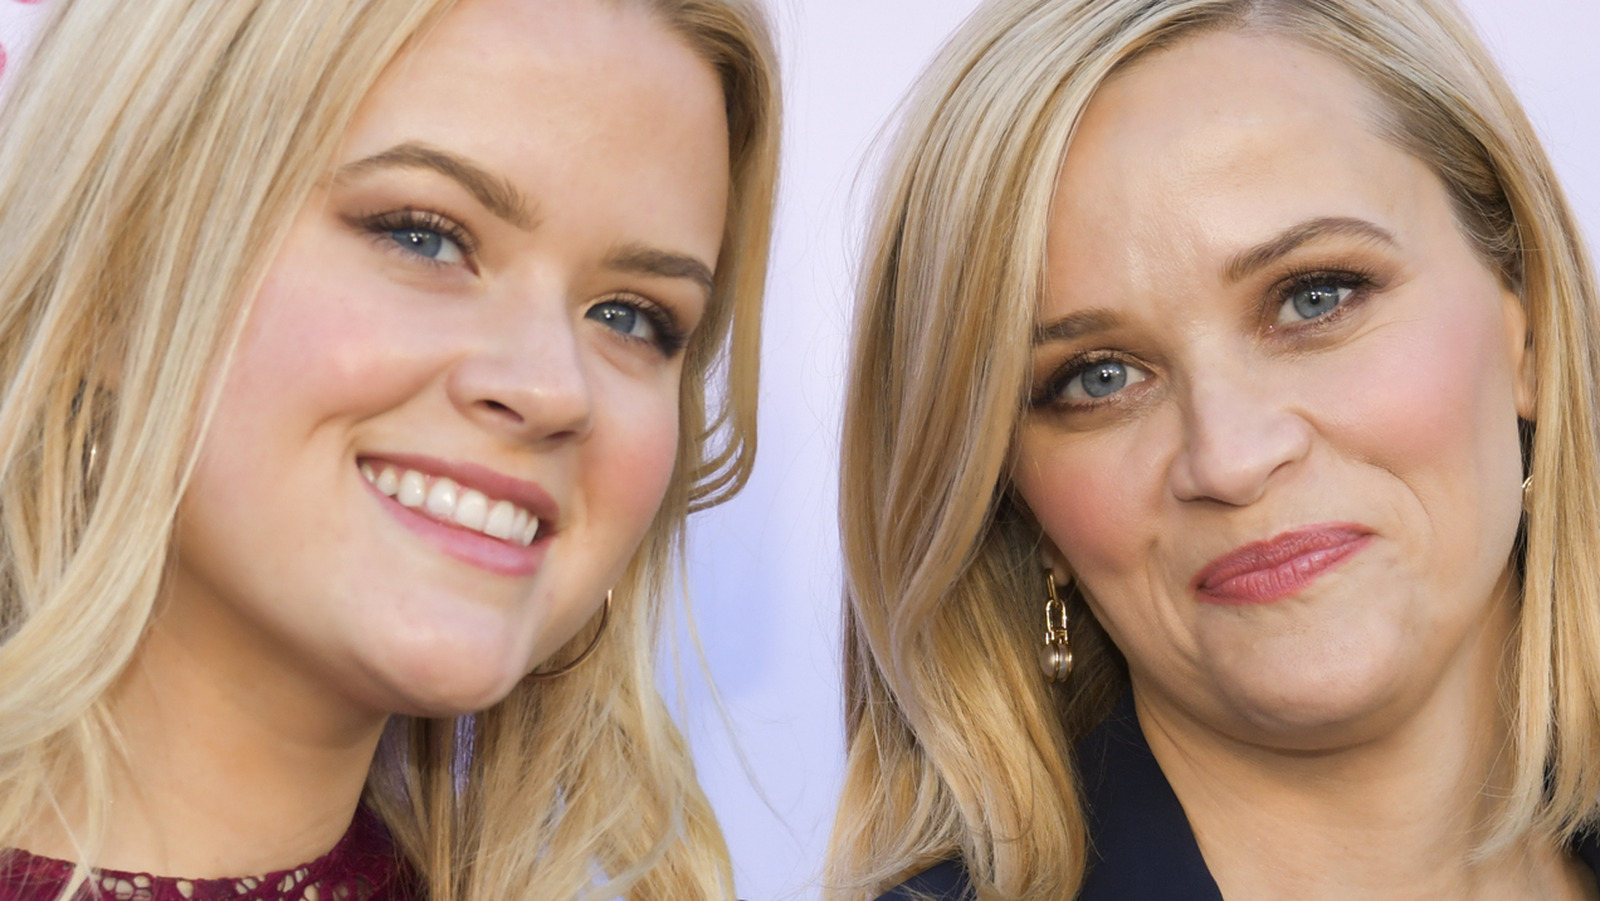 Reese Witherspoon Ava Phillippe  Reese Witherspoon Photos  Zimbio